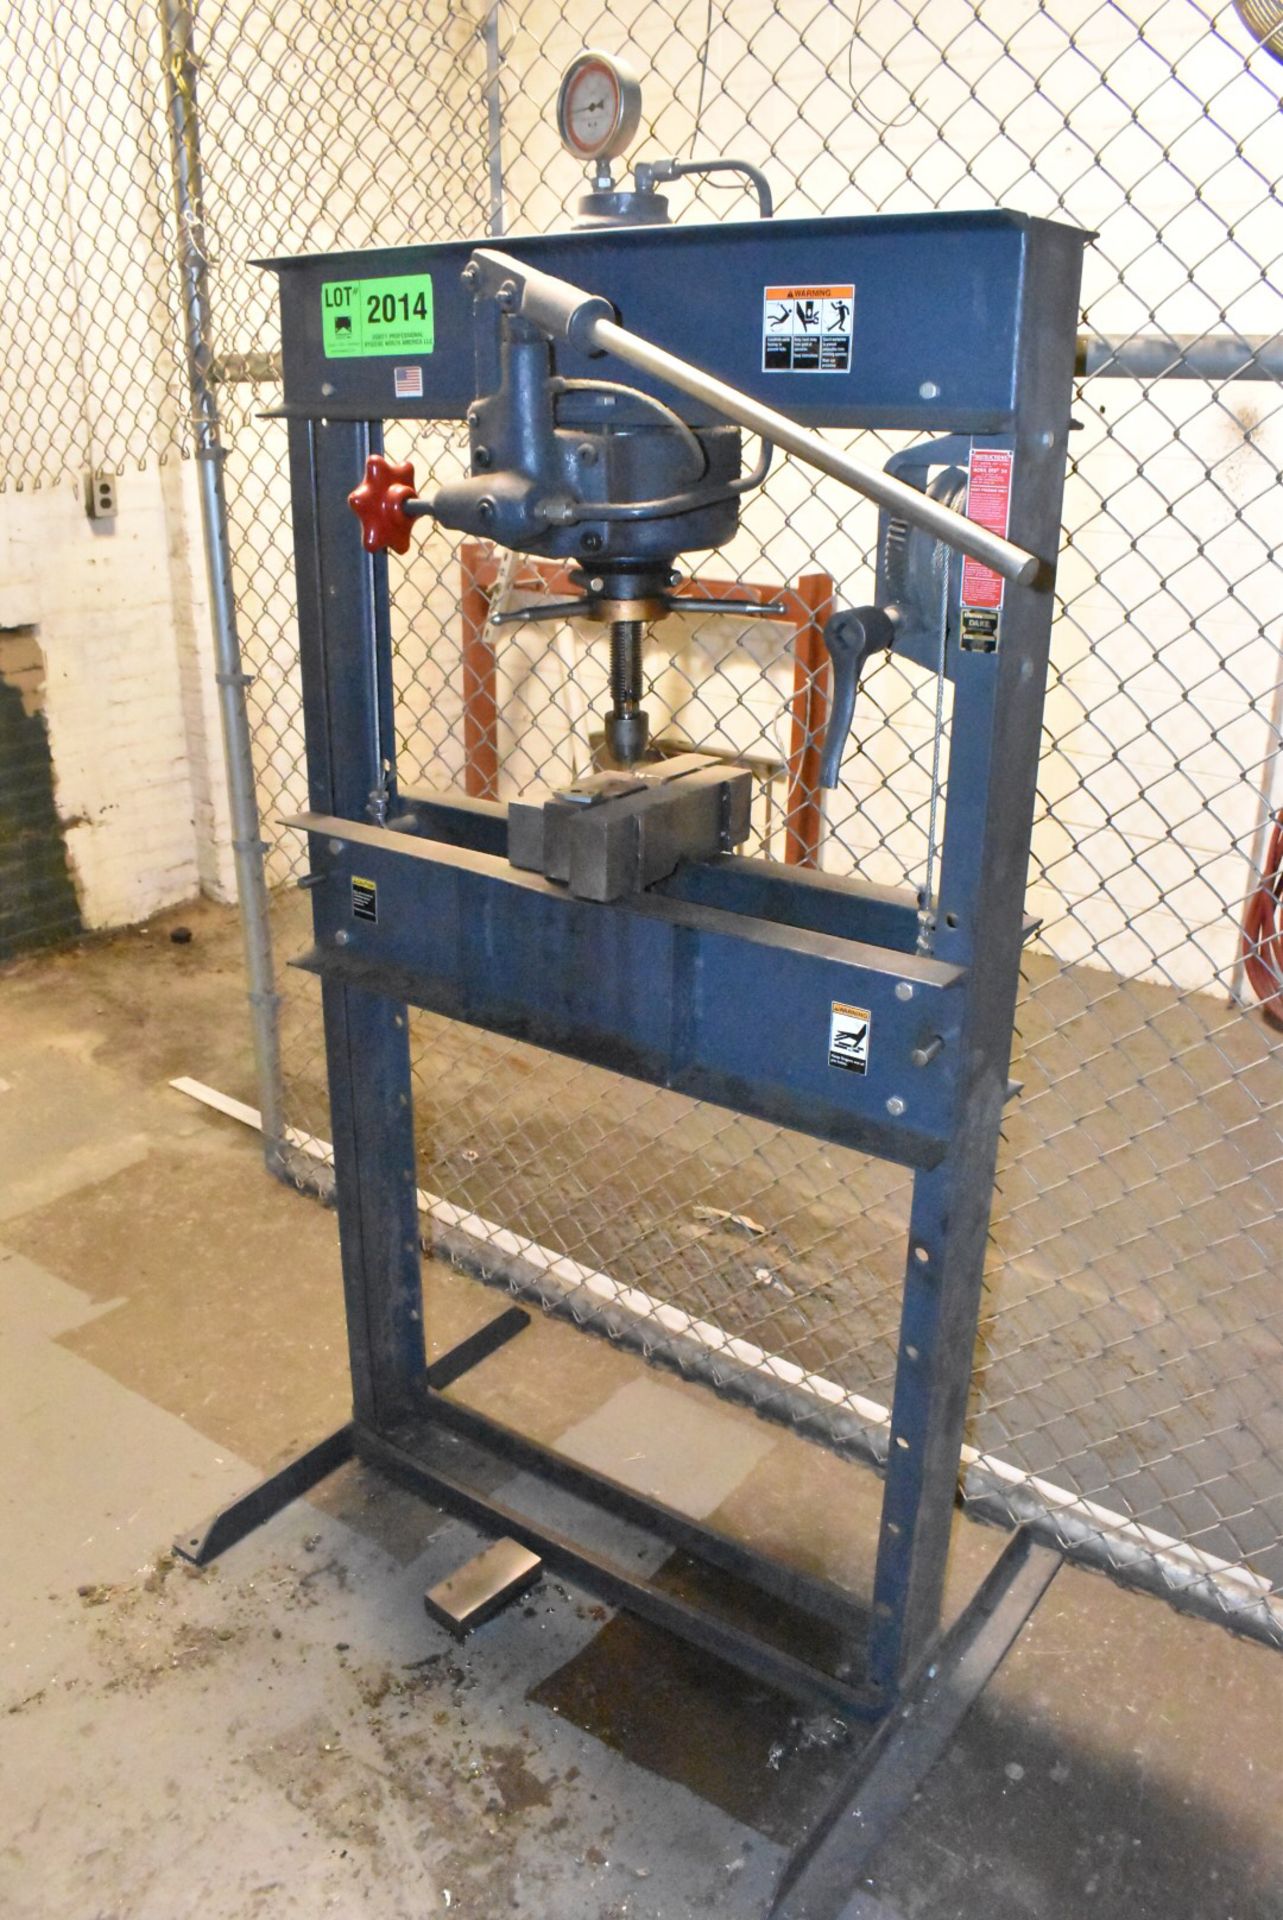 DAKE 25-H 25 TON HYDRAULIC H-FRAME SHOP PRESS, S/N 1134678 (CI) [RIGGING FEES FOR LOT #2014 - $100 - Image 5 of 6